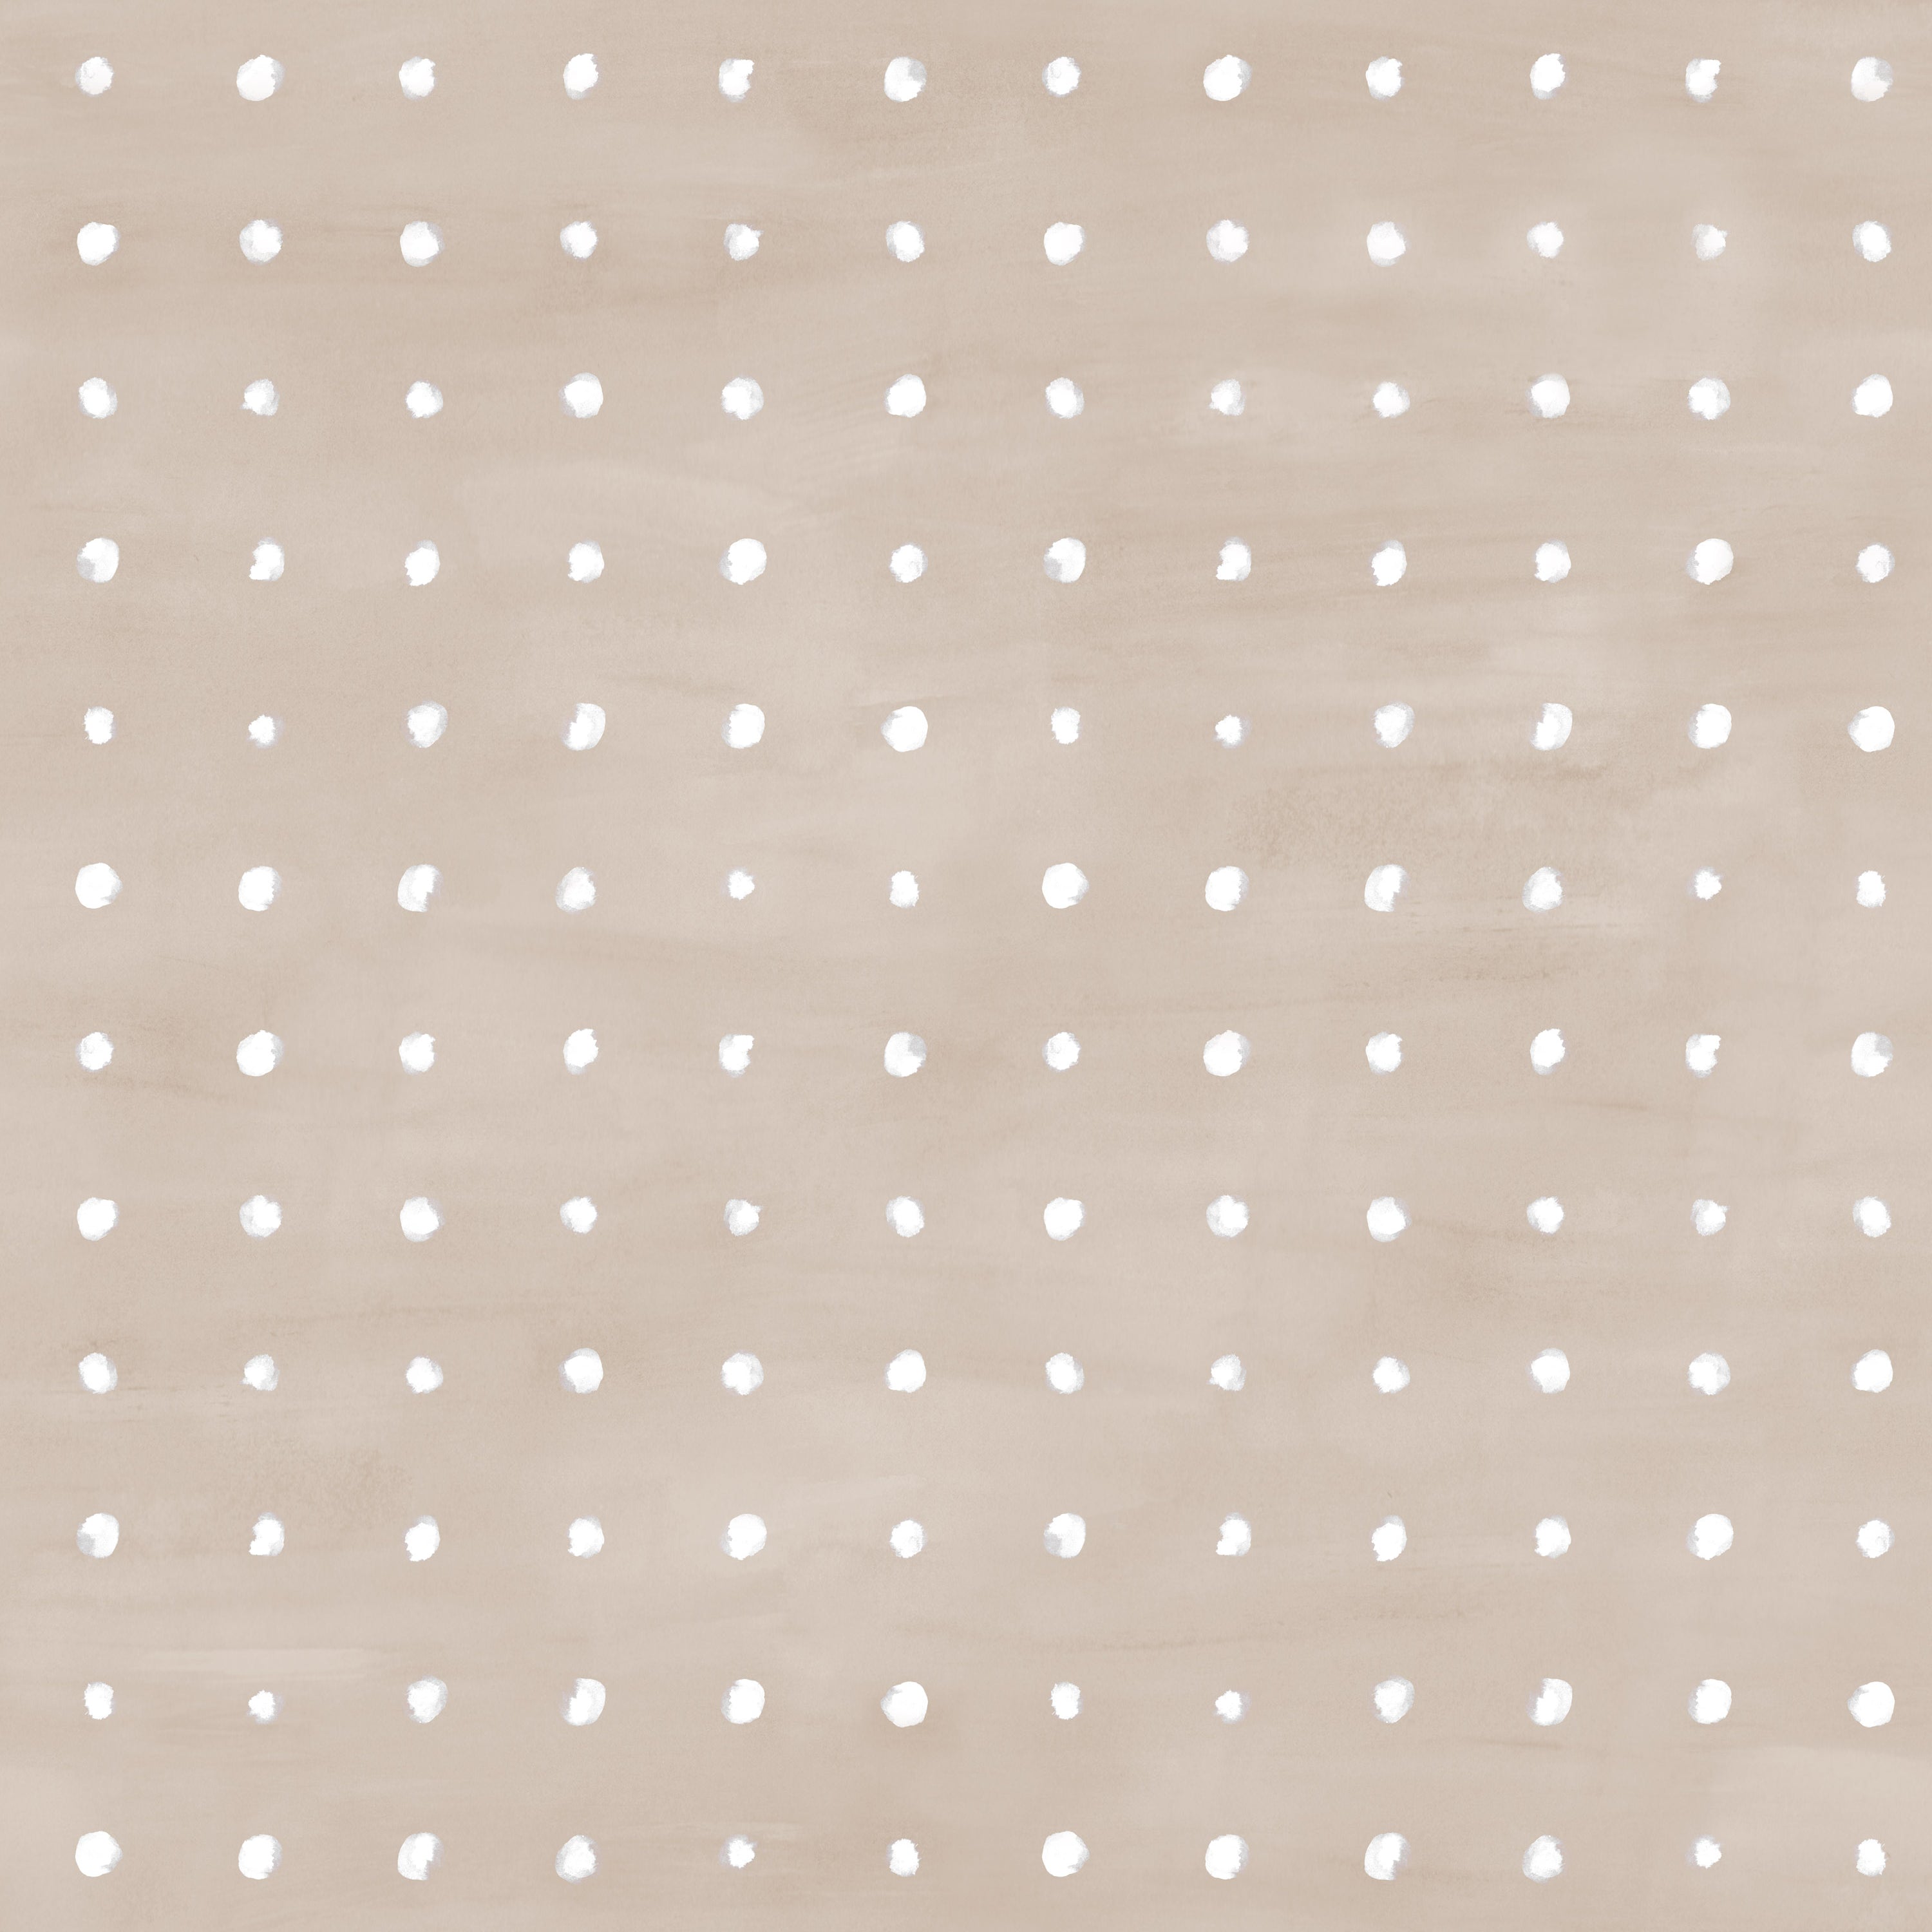 Detail of wallpaper in a dotted grid pattern in white on a tan field.